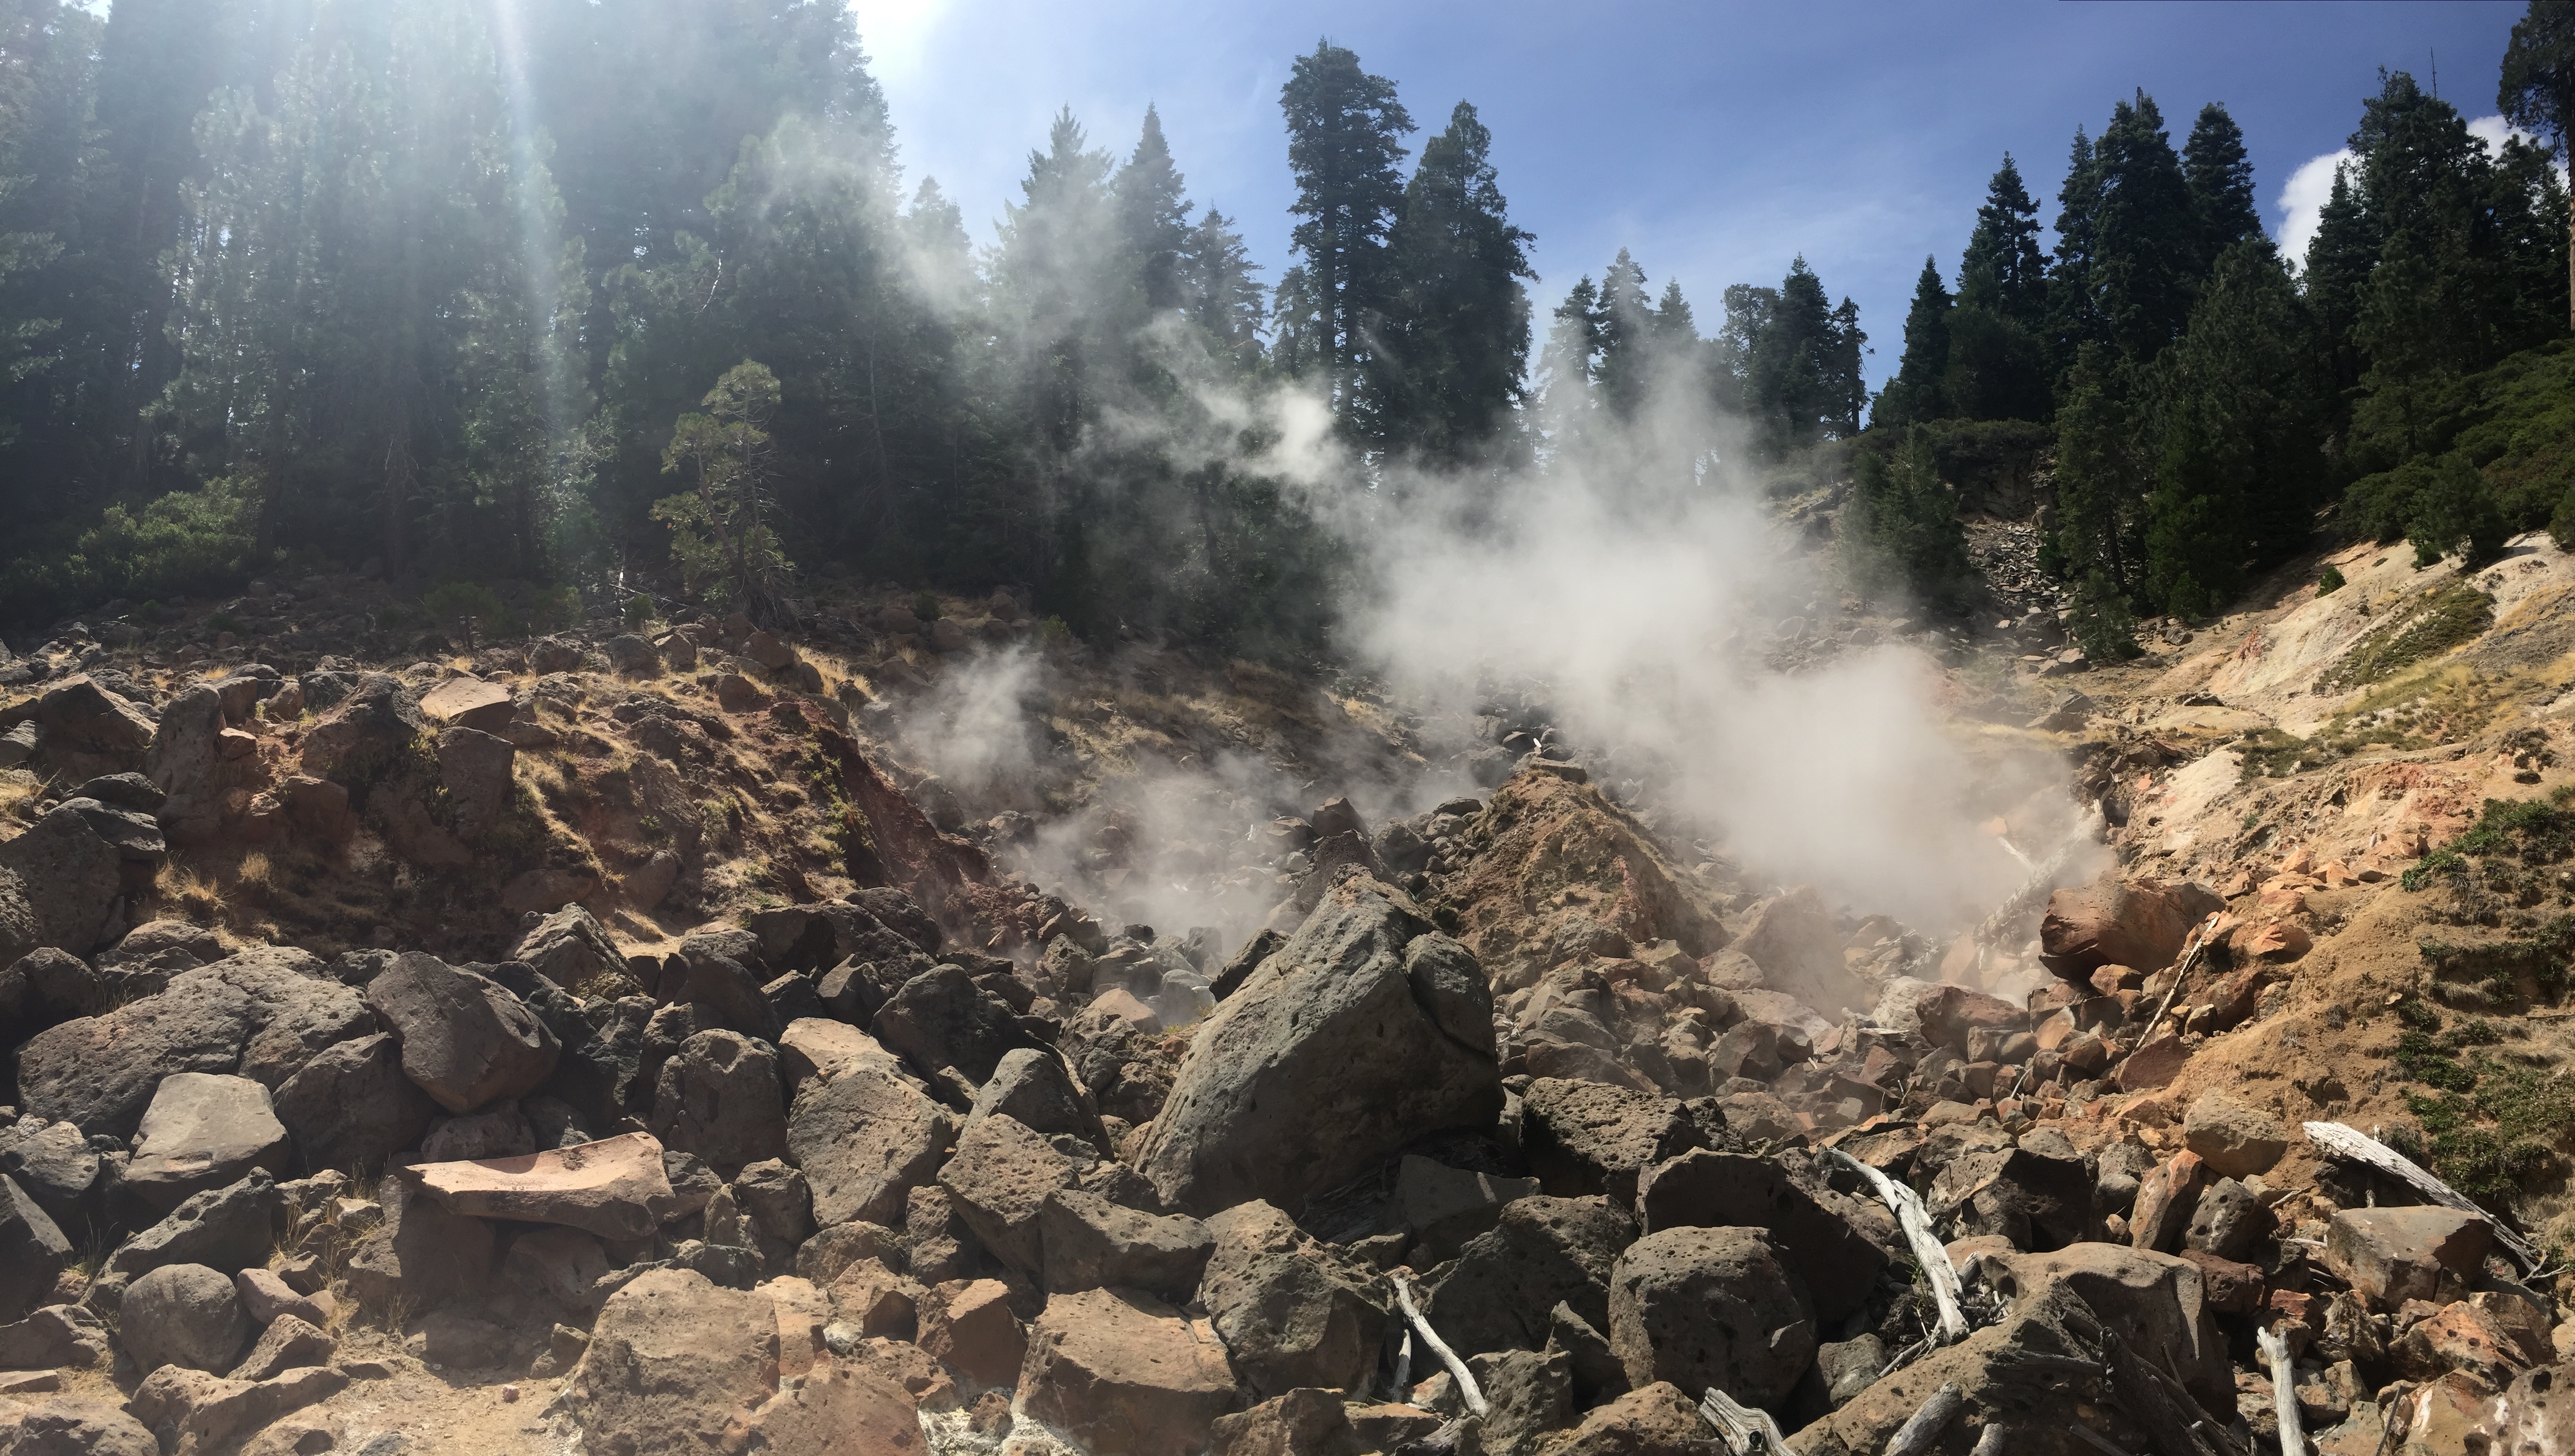 Day 101: Geysers, Tri-Tip, and Corn Dogs